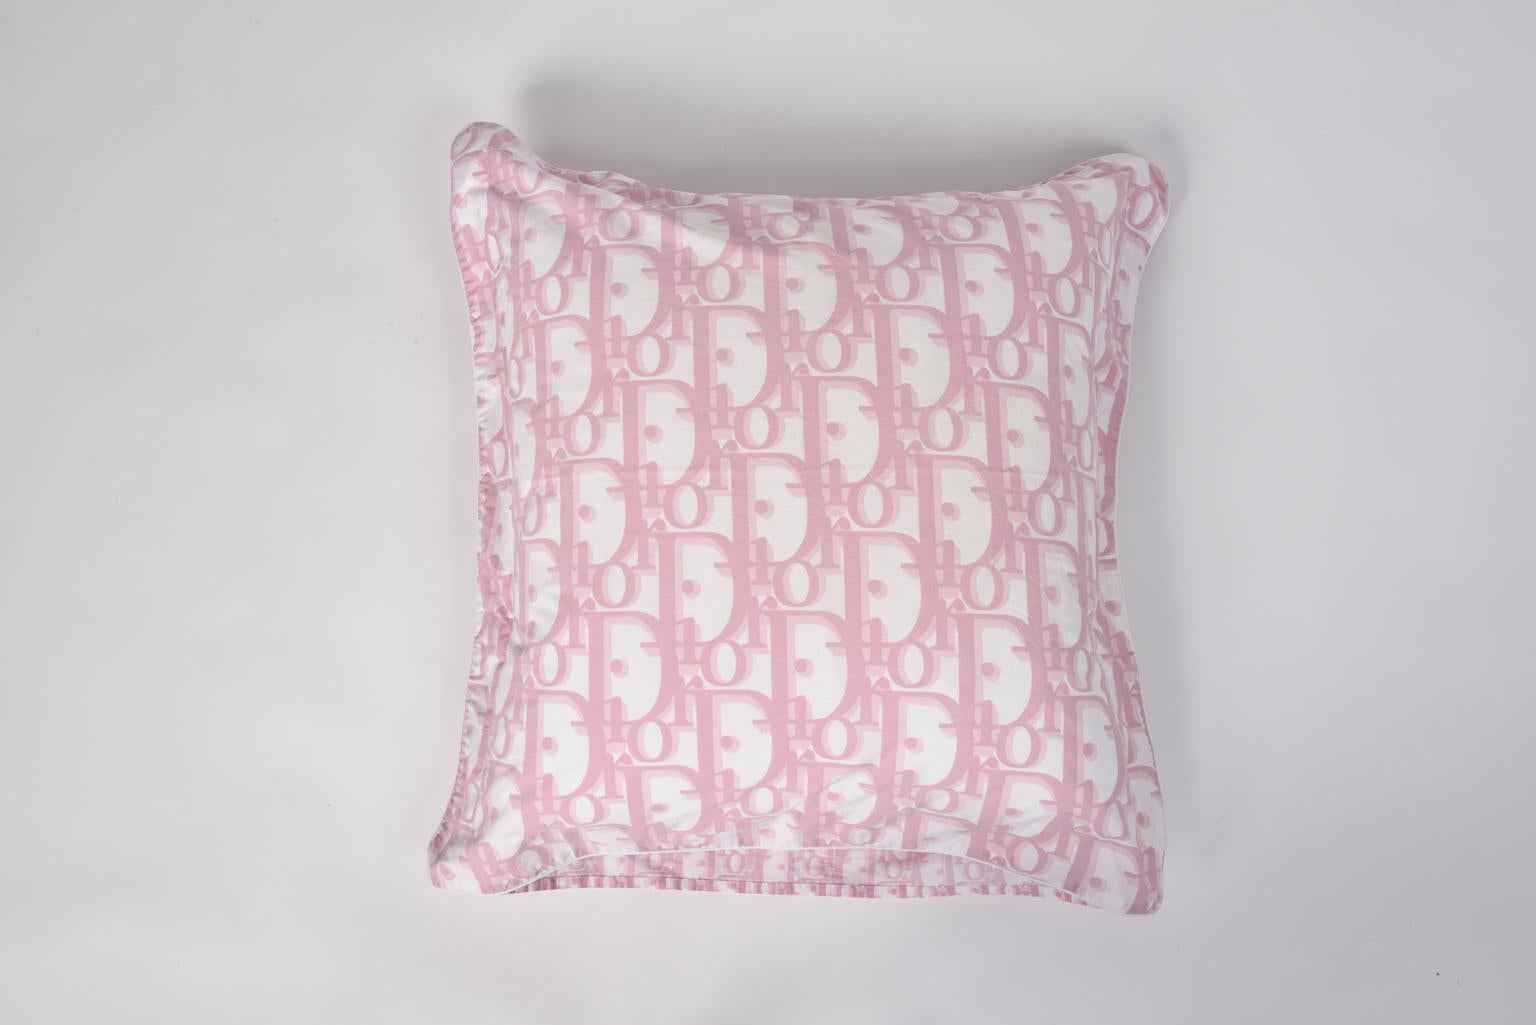 Have a pink restful sleep with this rare Christian Dior pillow case. Made of high quality cotton, one side of the cover features the oversized iconic 